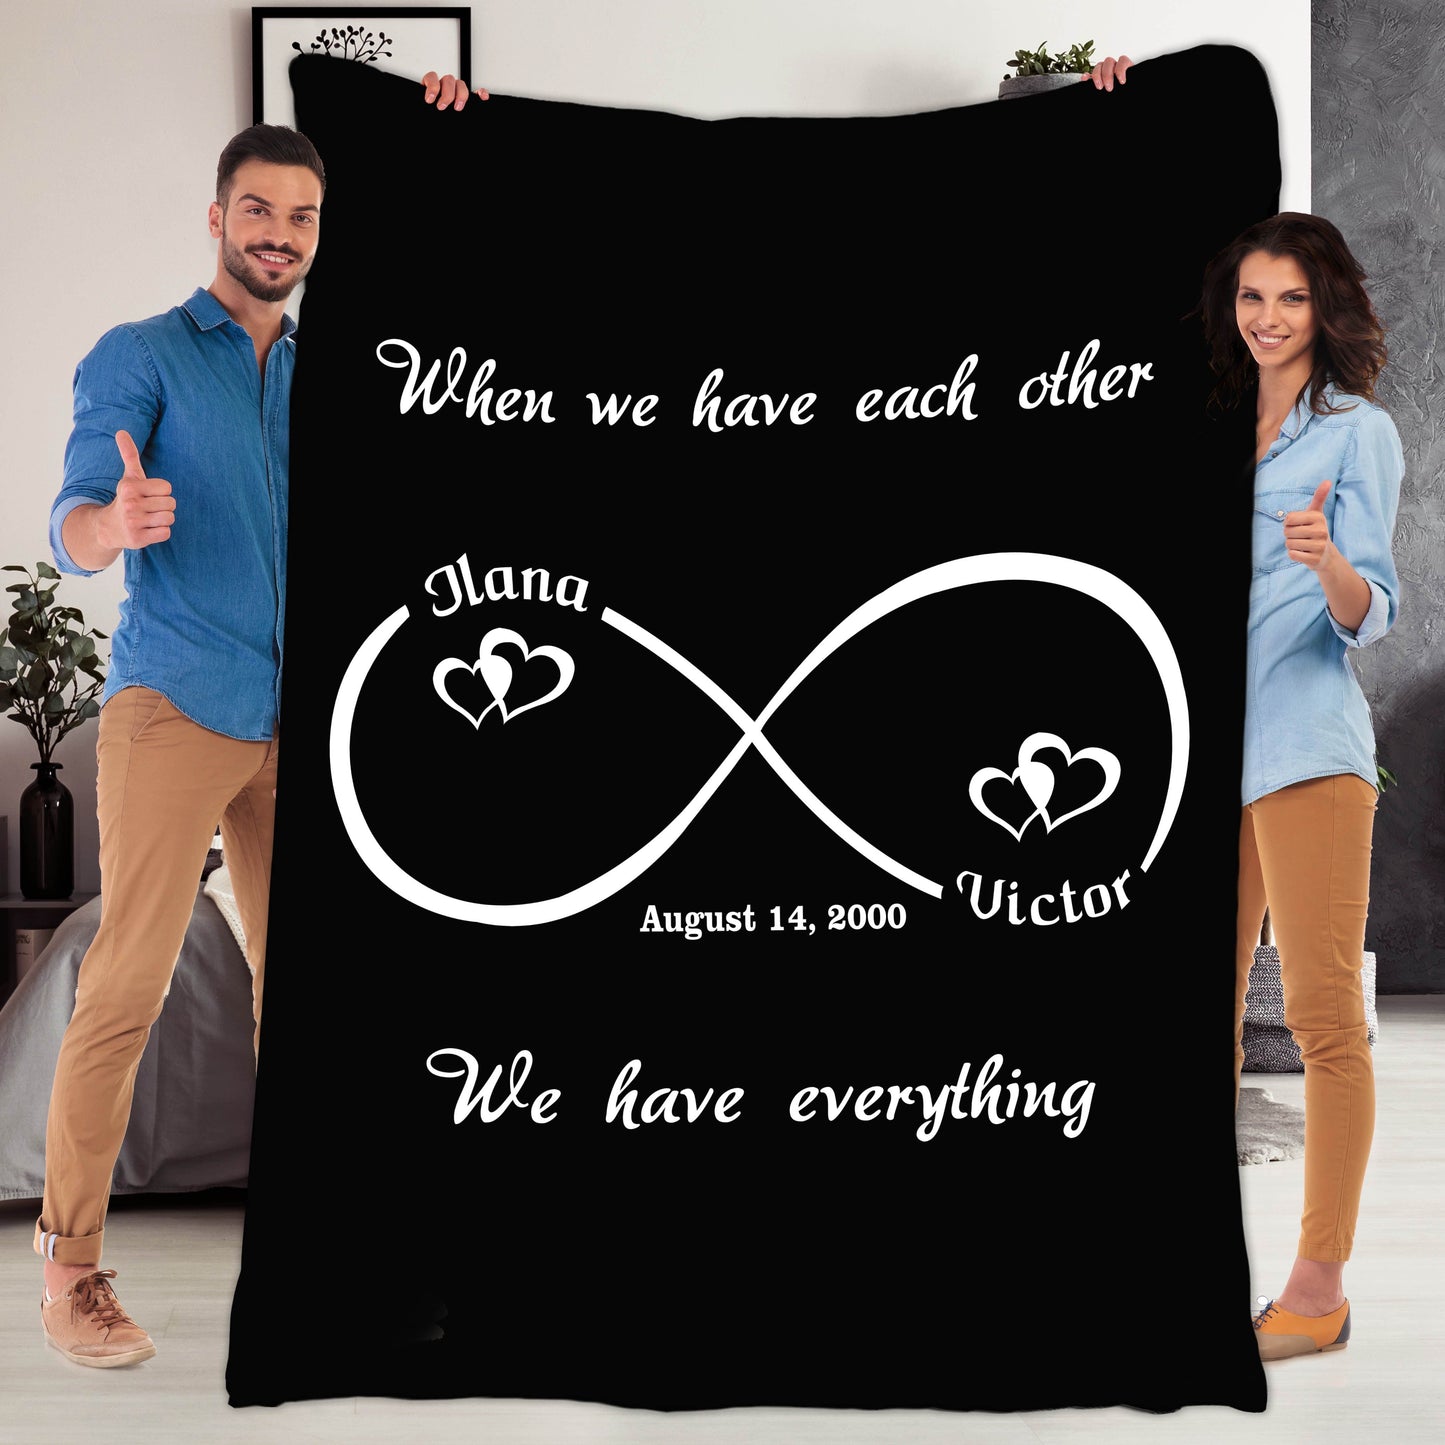 Personalized Blanket Adult-Best Selling-60"X80" / Black Infinity Love Personalized Blanket